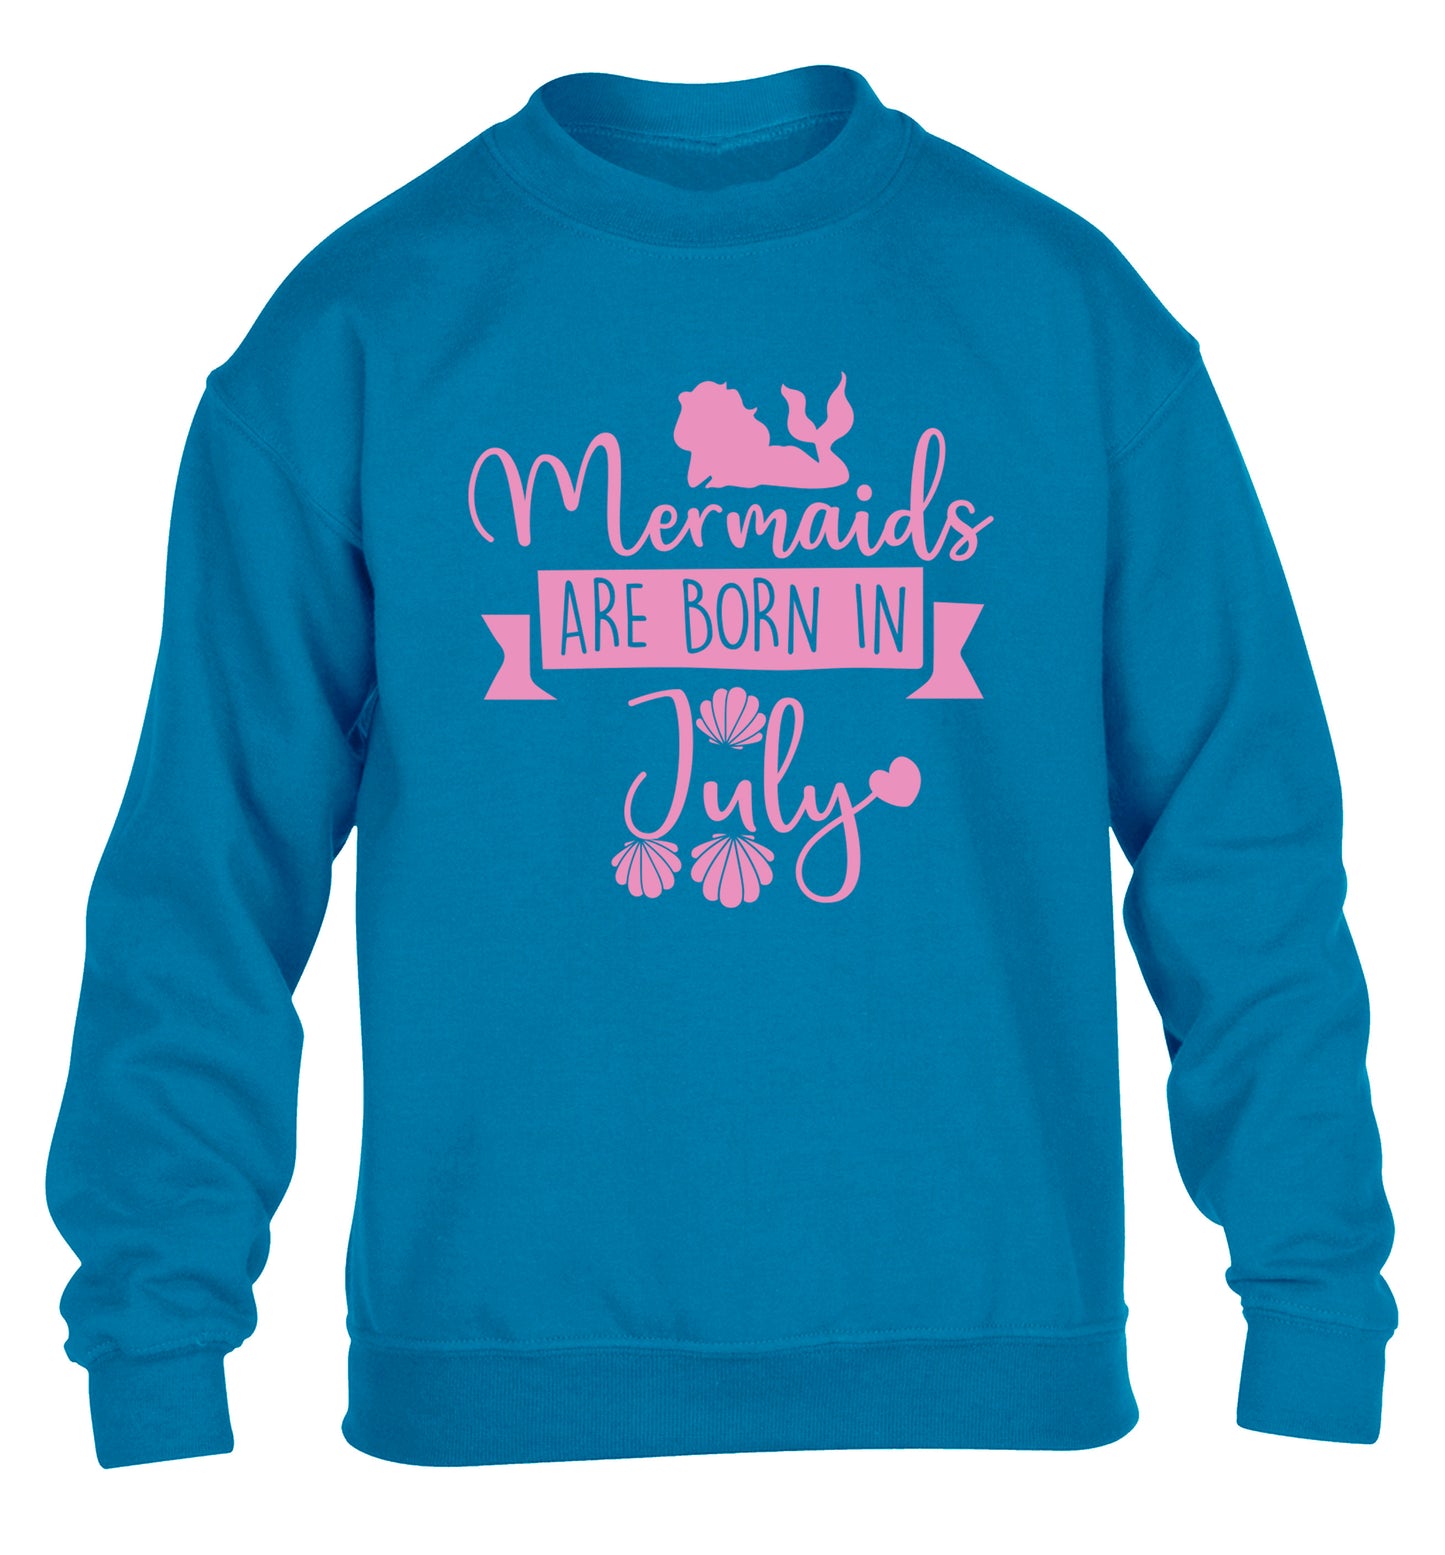 Mermaids are born in July children's blue sweater 12-13 Years